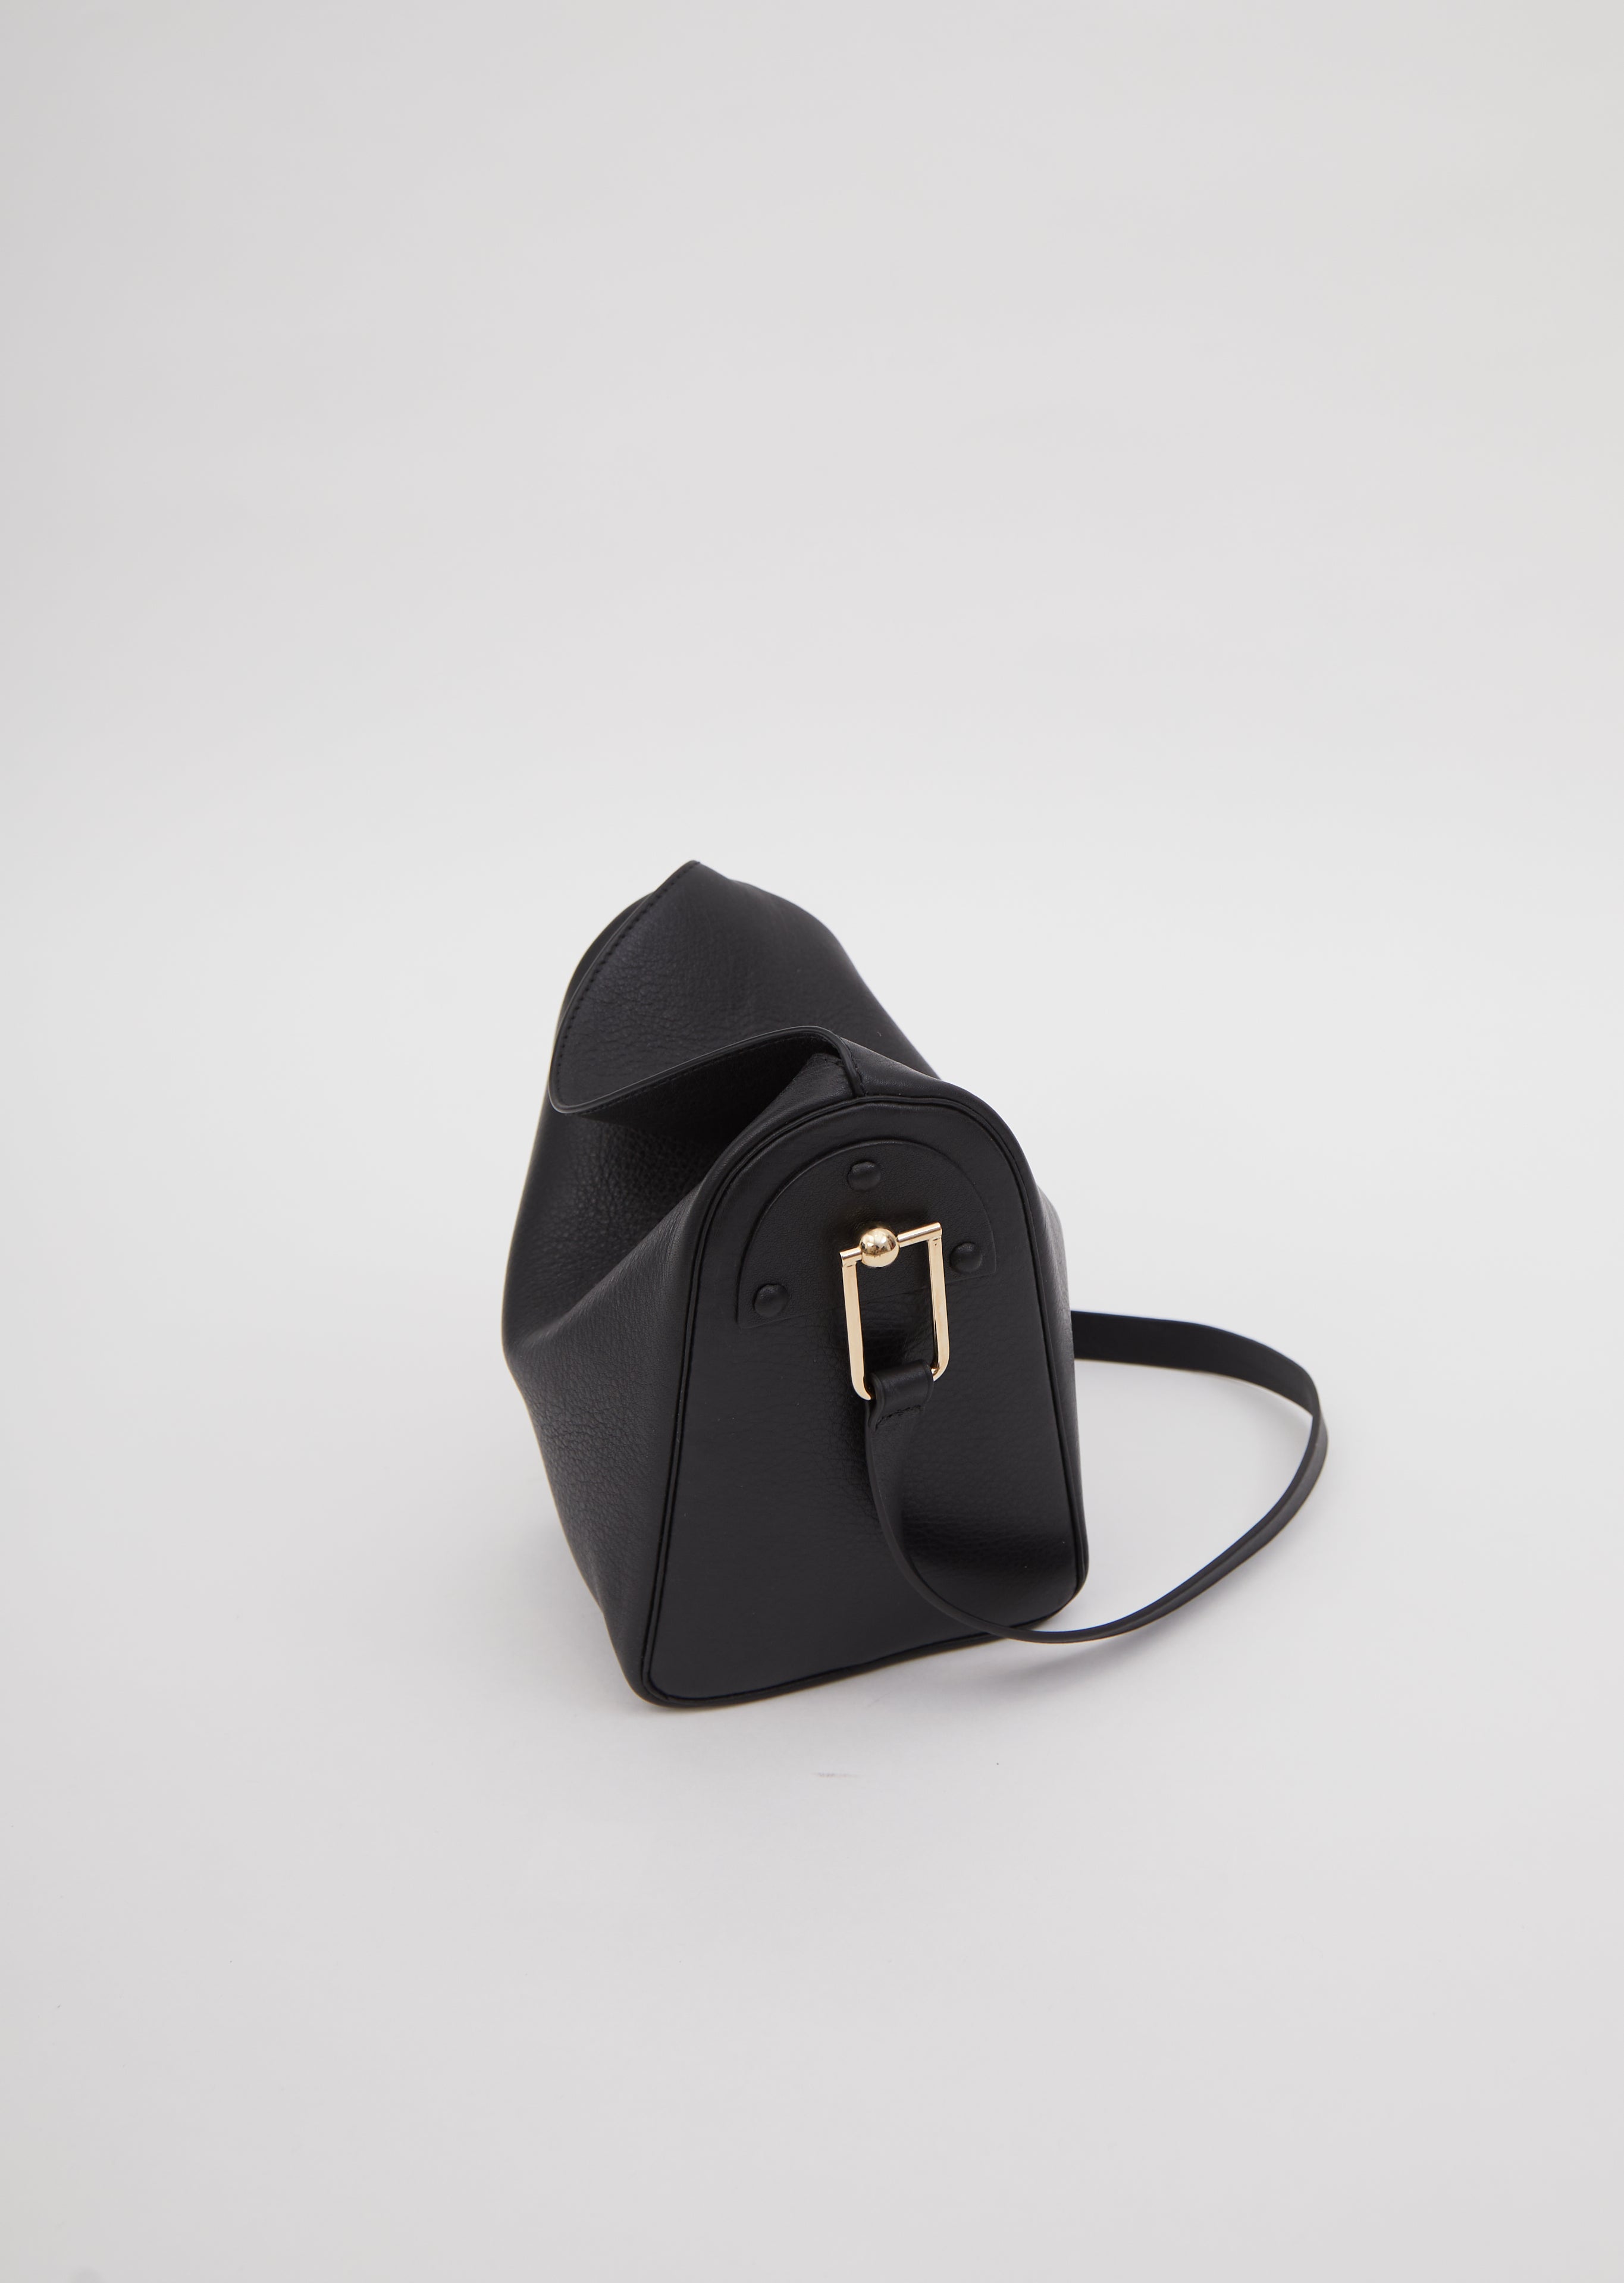 LEMAIRE small folded bag 春先取りの - バッグ